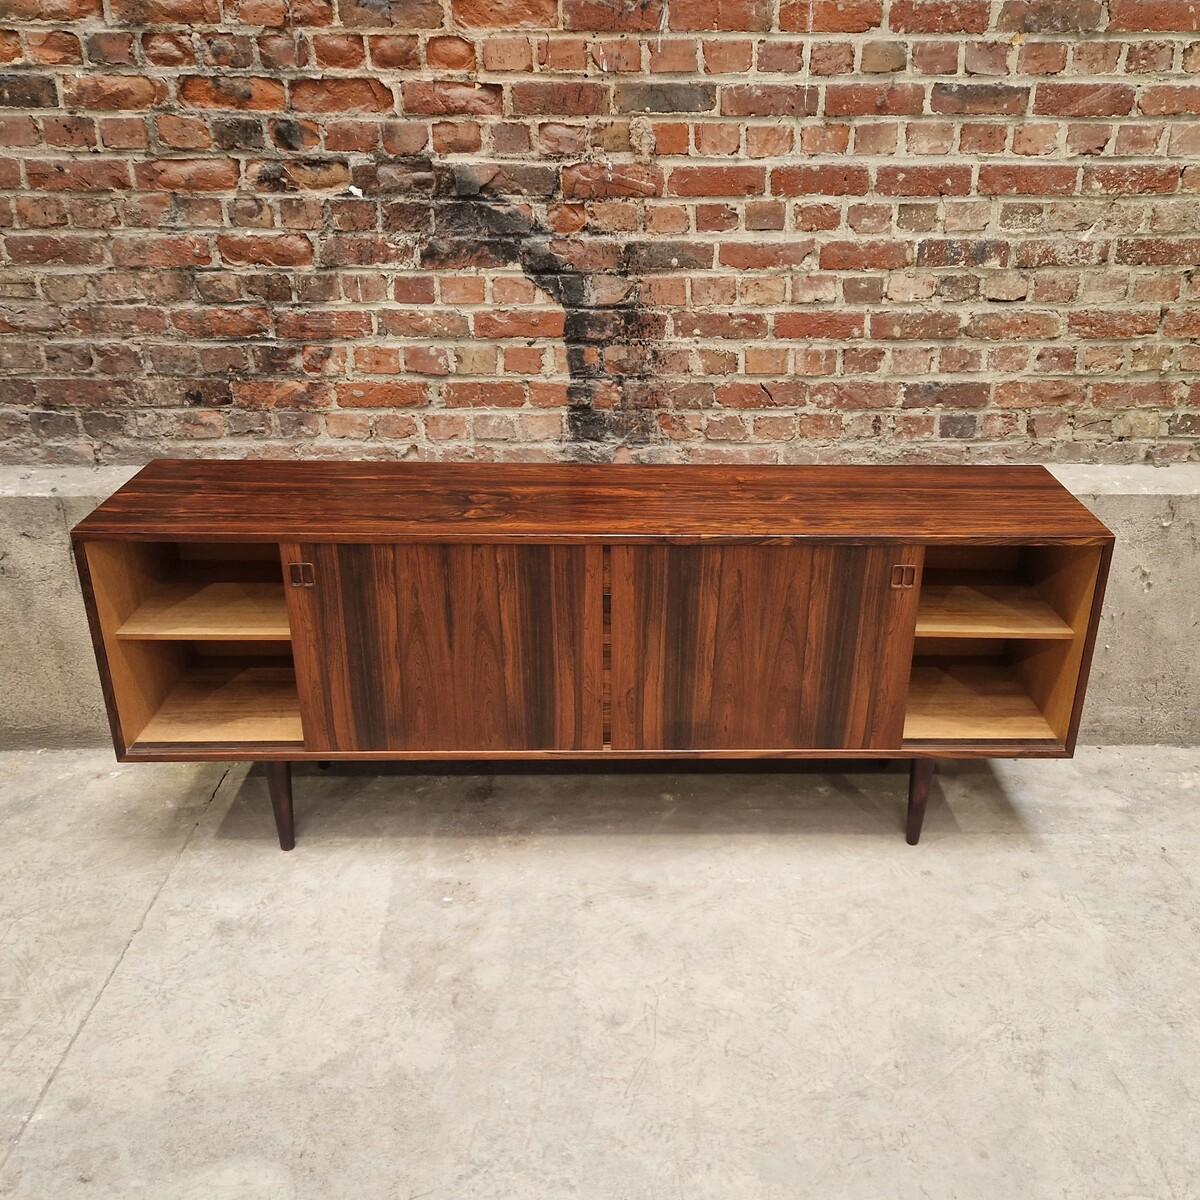 Beautiful vintage scandinavian Sideboard with lots of storage space , from Denmark 